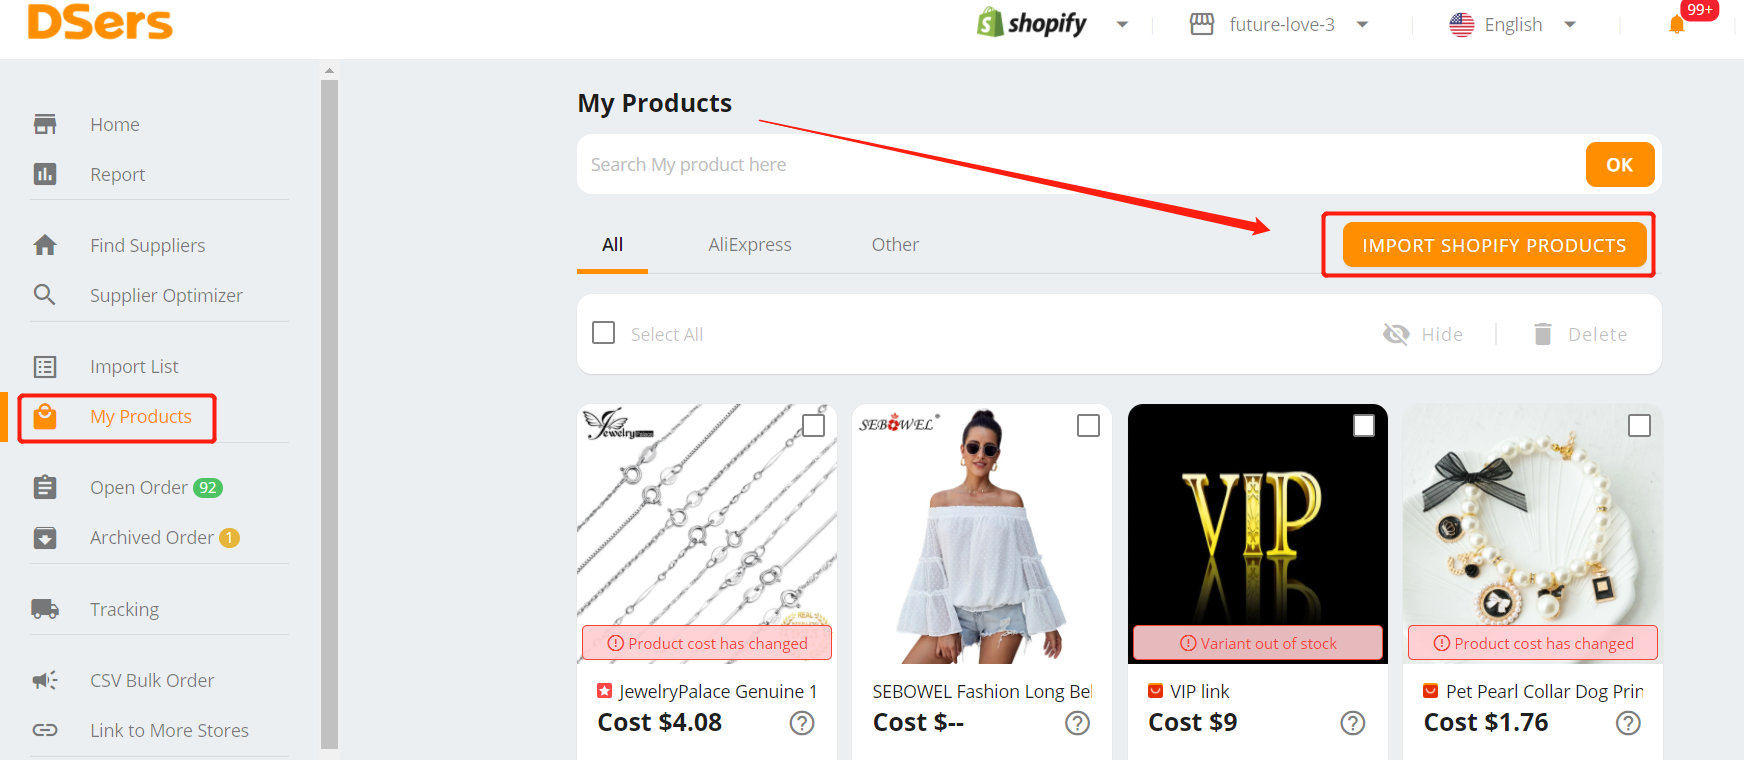 Create a product on Shopify - DSers My Products Page - Shopify DSers